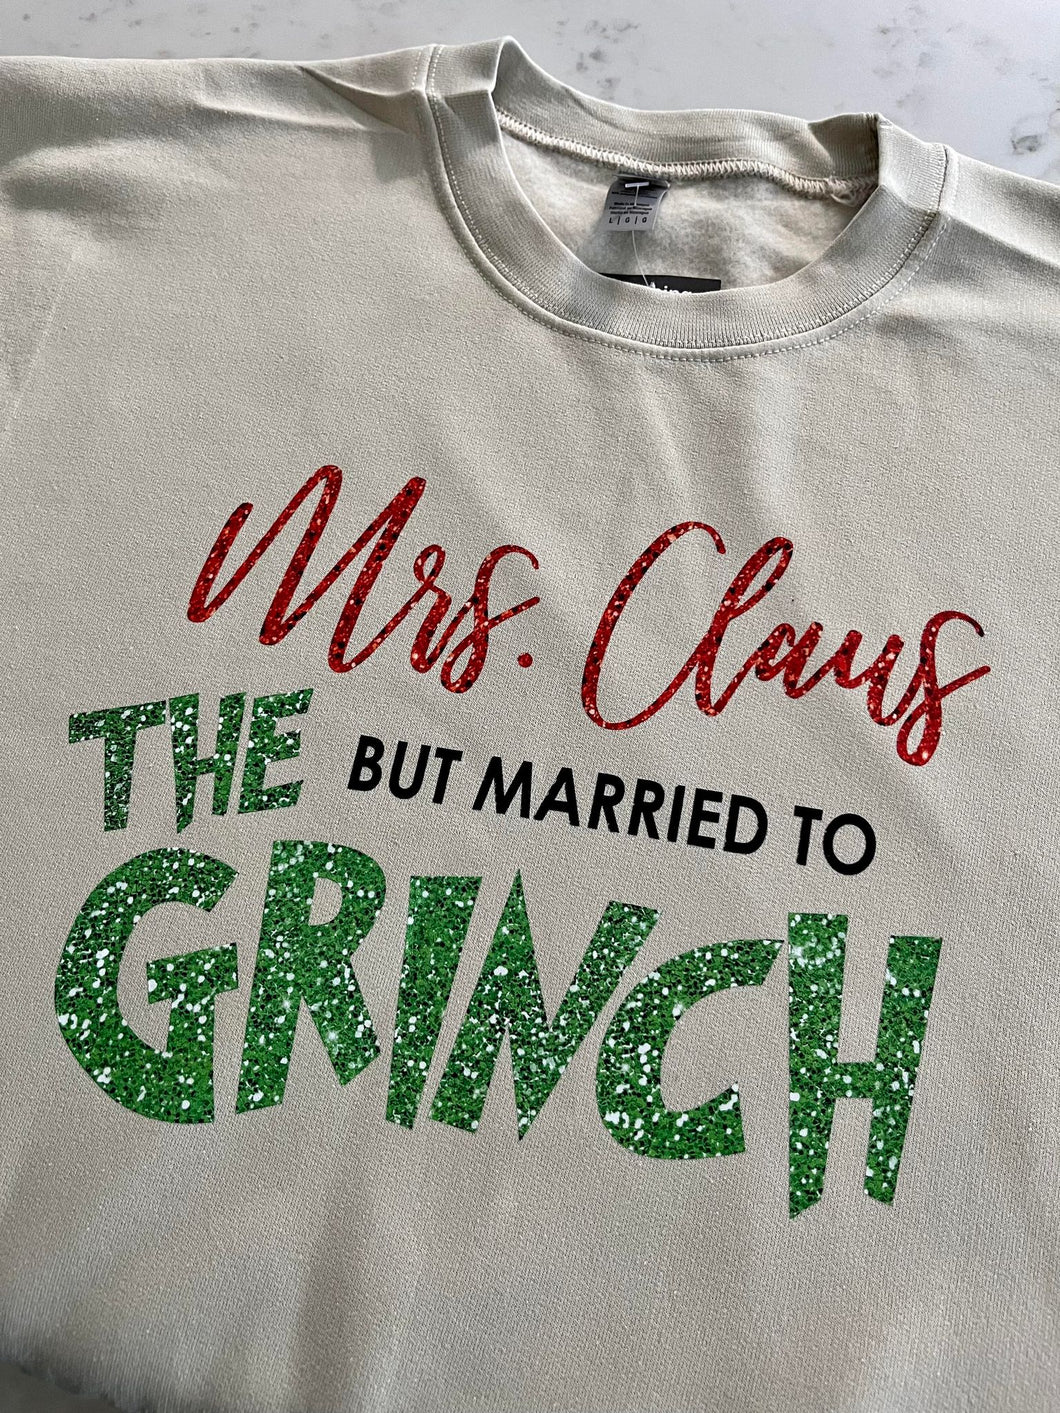 Mrs. Claus But Married To The Grinch